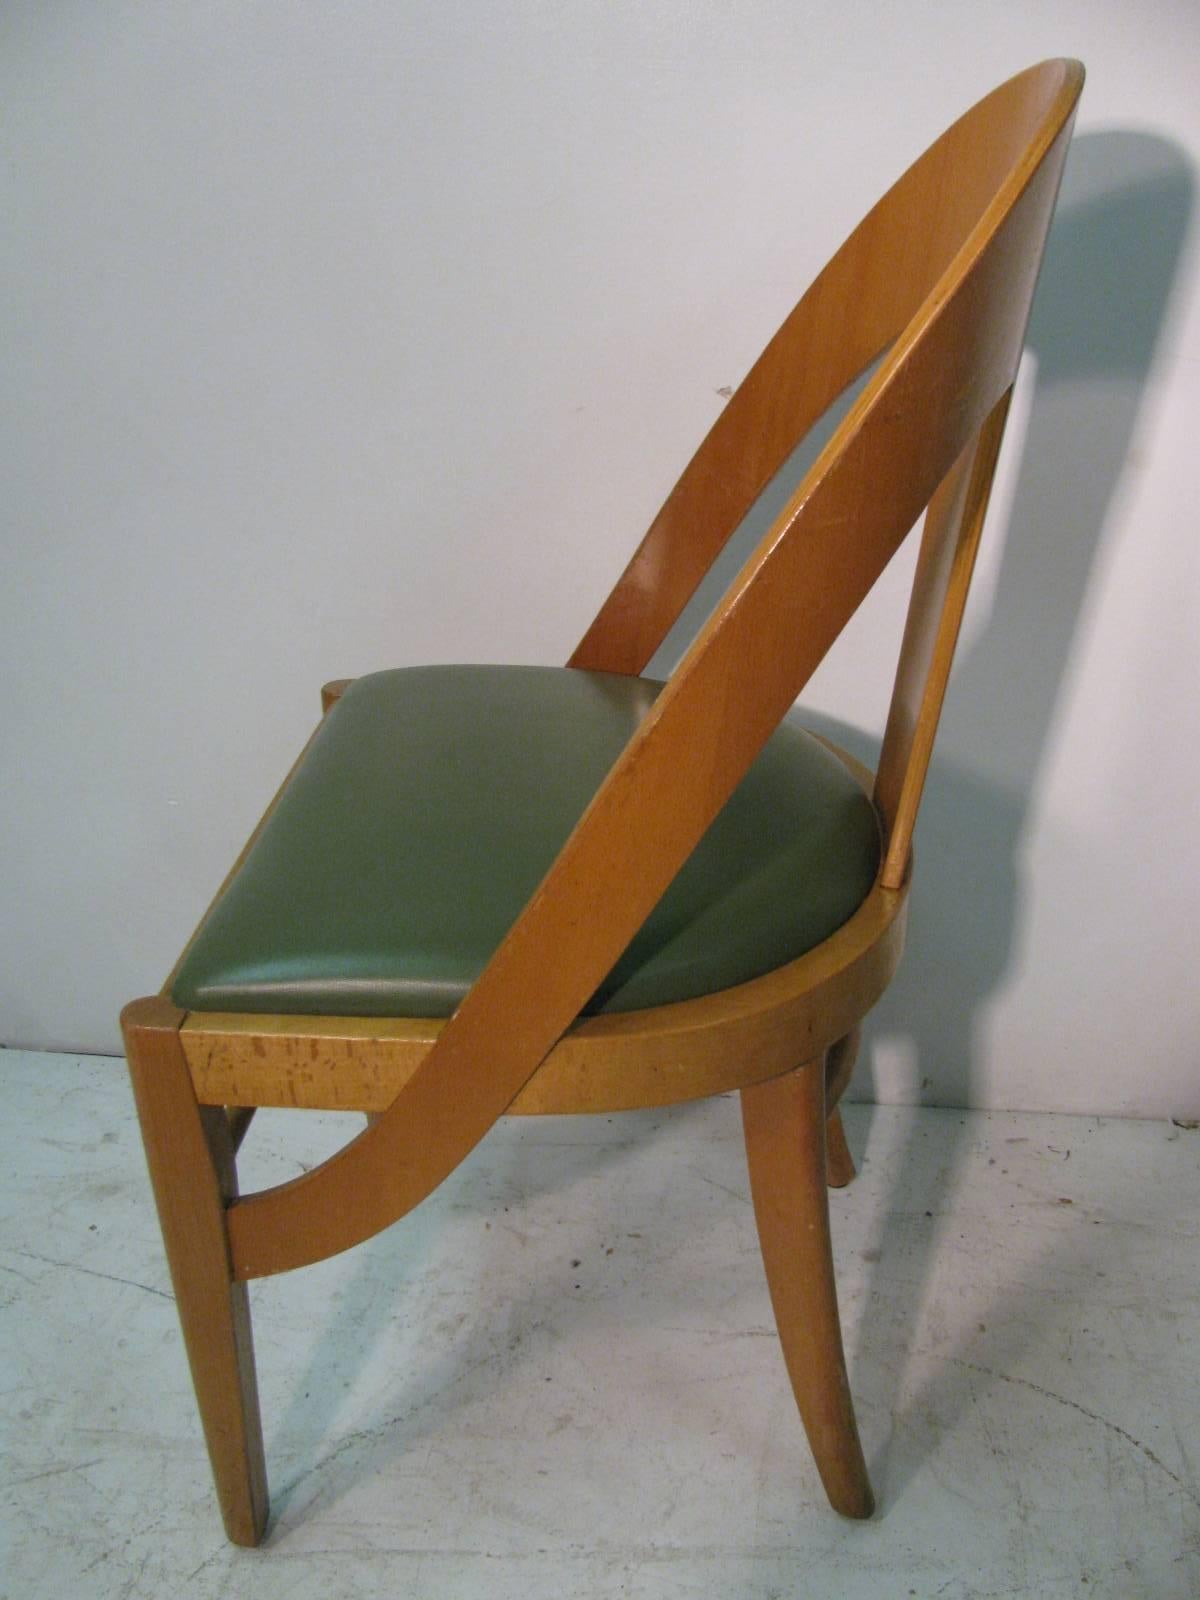 Late 20th Century  Mid-Century Modern Bent Maple Spoon Back Cafe Dining Chairs 3 Available